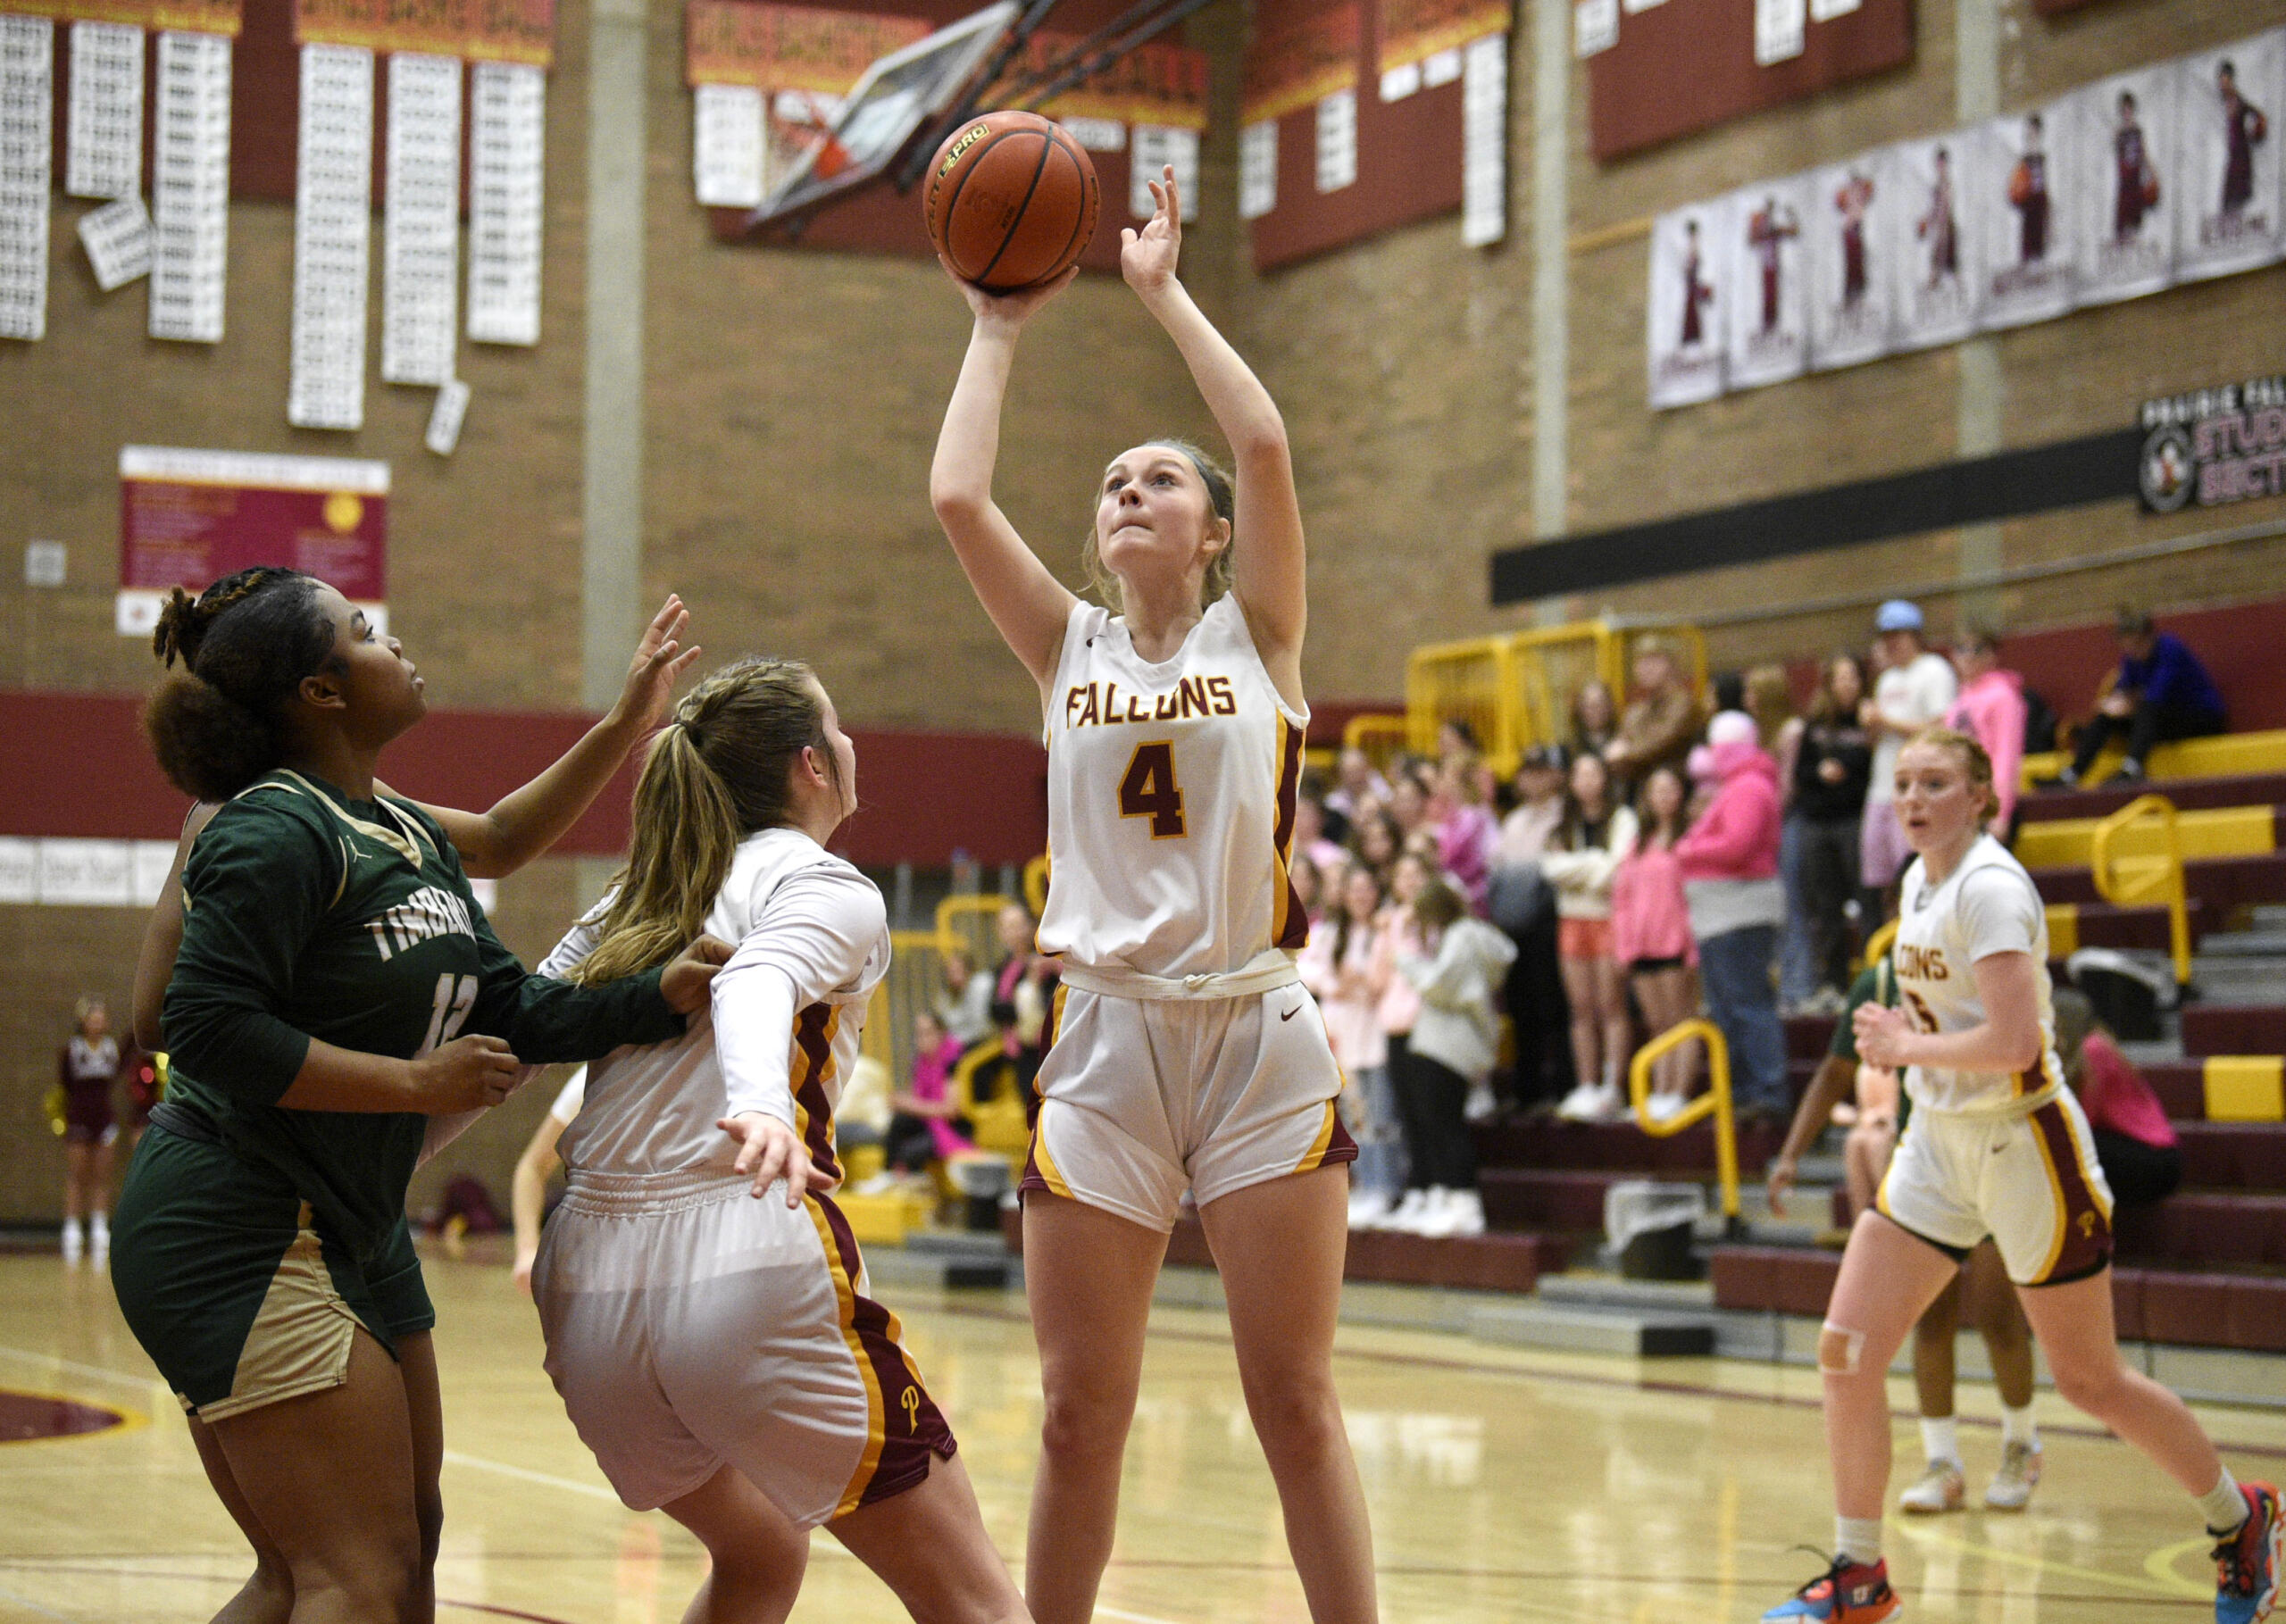 Prairie’s Claire Smith, center, gets ready to release a shot during a Class 3A bi-district game against Timberline on Friday, Feb. 10, 2023, at Prairie High School.